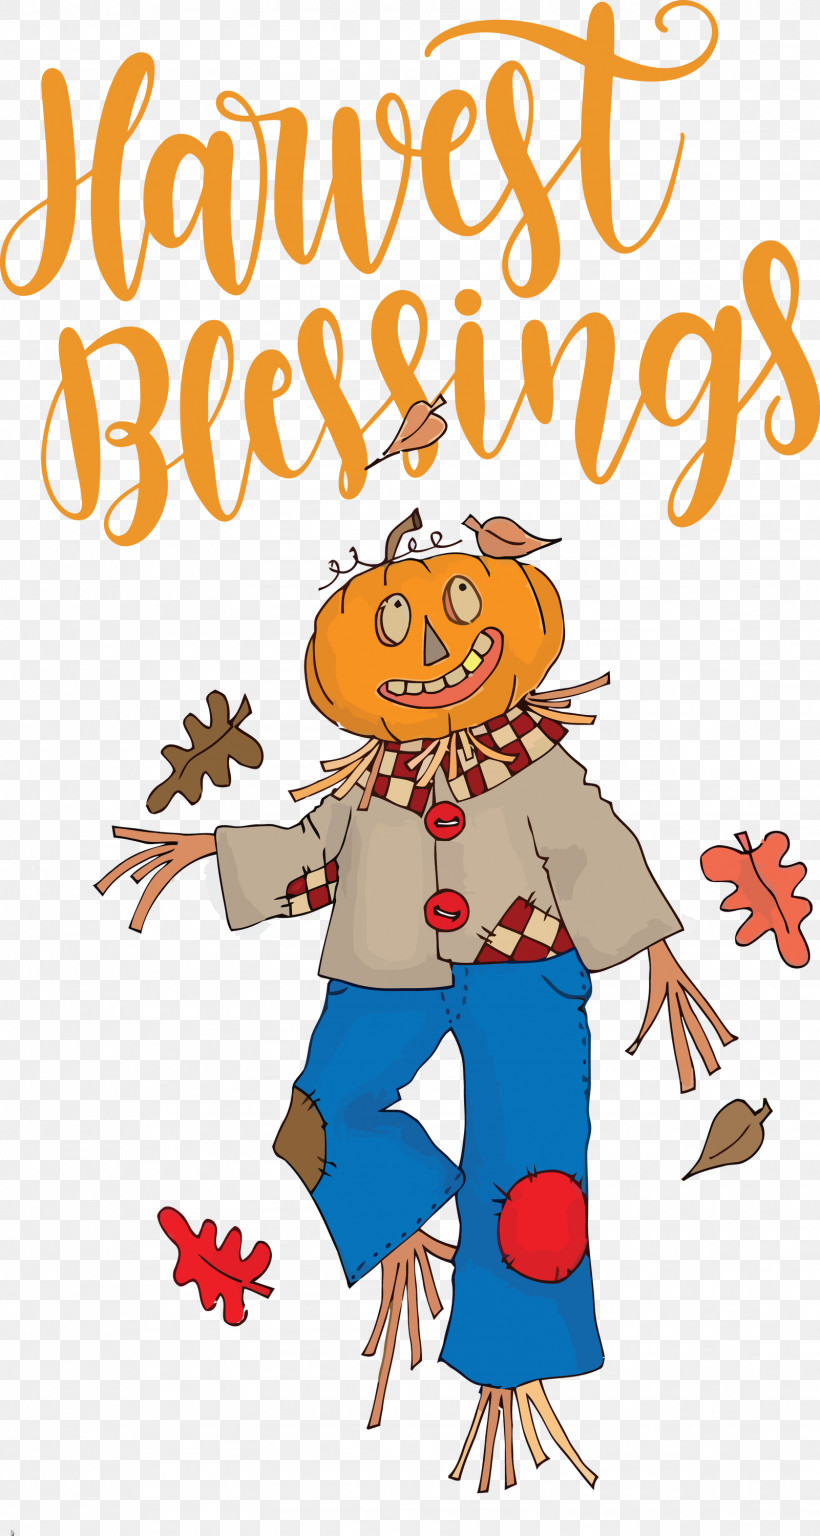 Harvest Blessings Thanksgiving Autumn, PNG, 1601x2999px, Harvest Blessings, Autumn, Cricut, Season, Thanksgiving Download Free